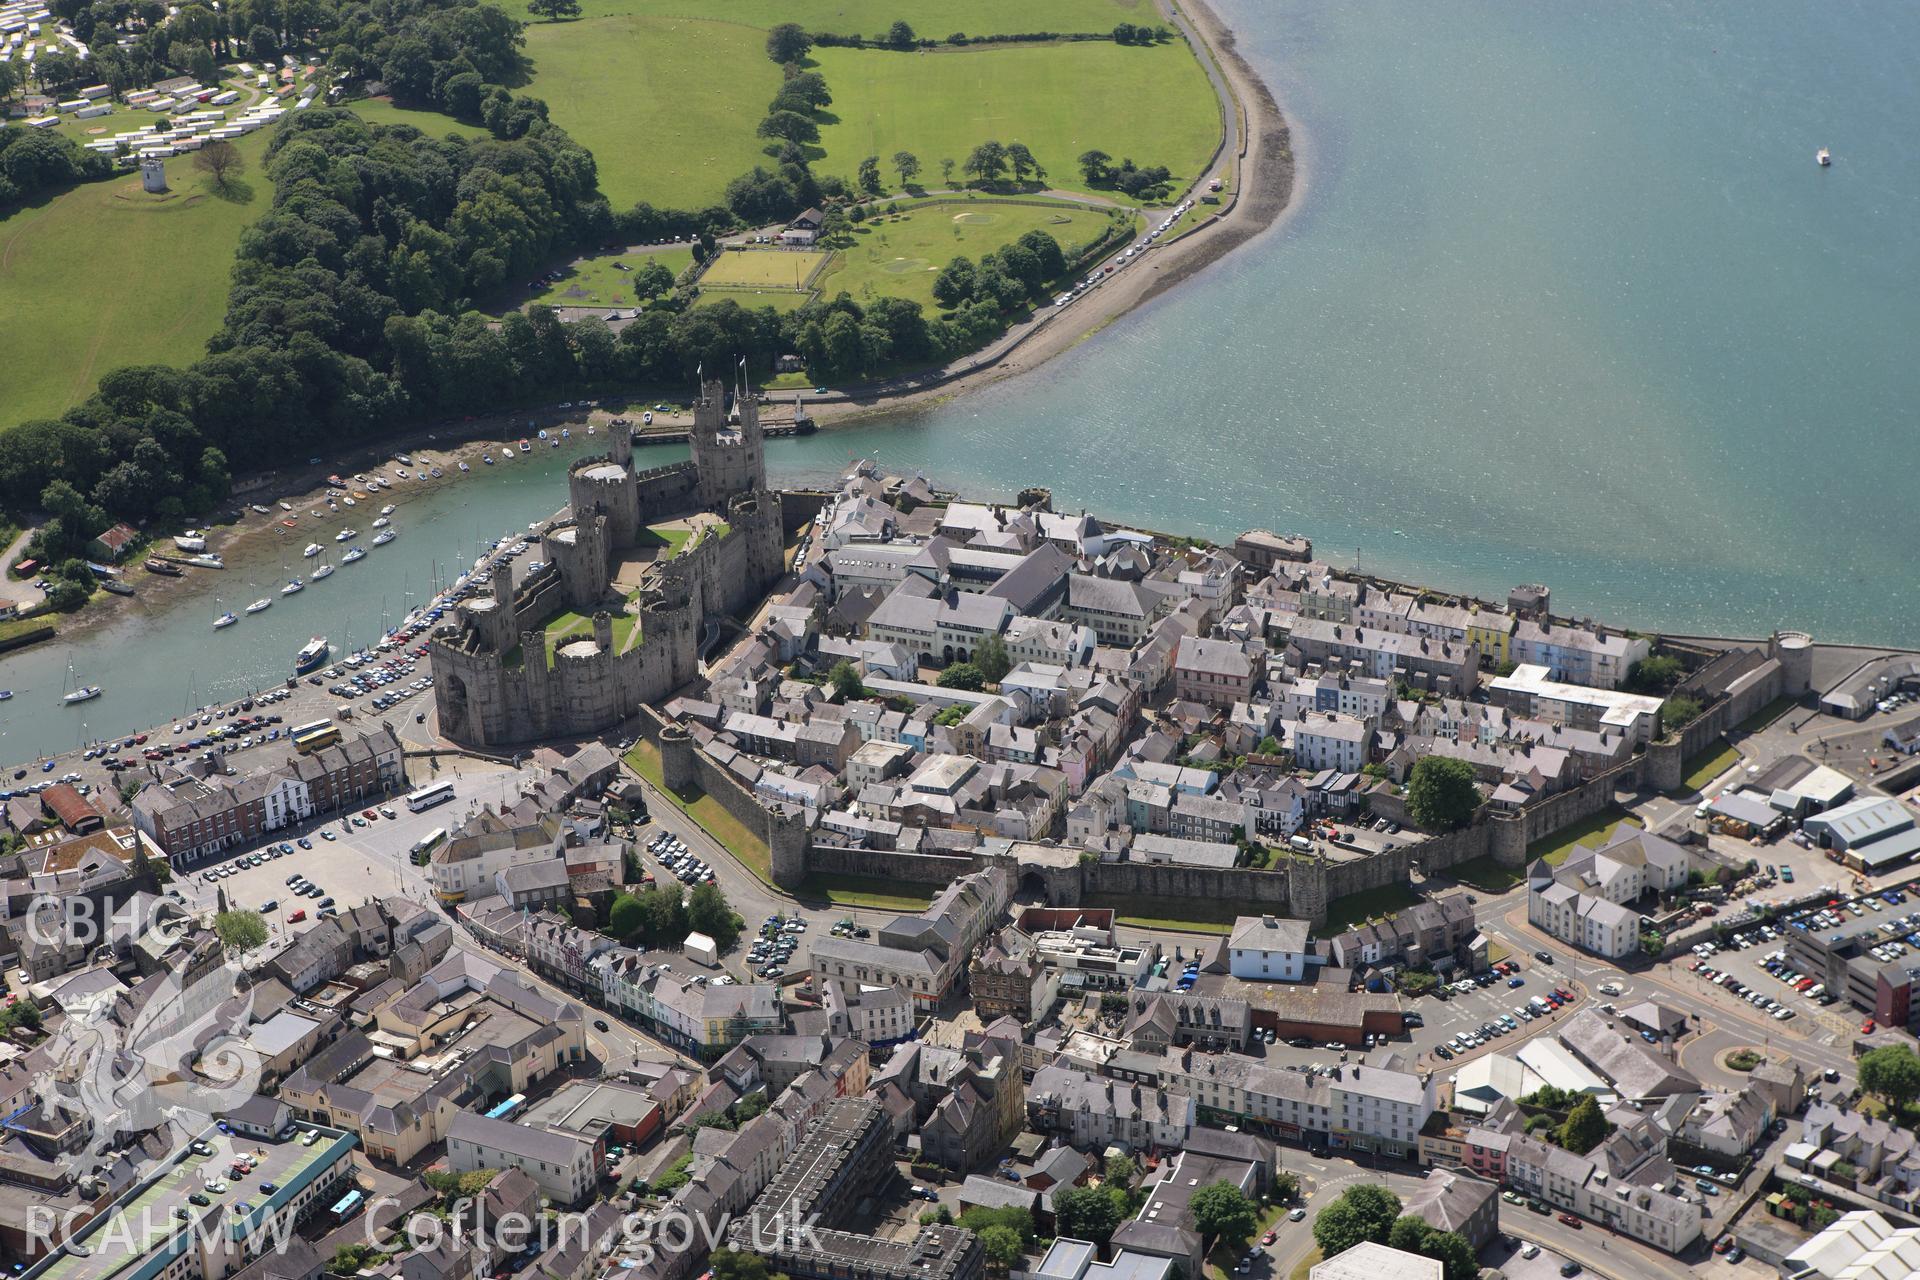 RCAHMW colour oblique aerial photograph of Caernarfon. Taken on 16 June 2009 by Toby Driver